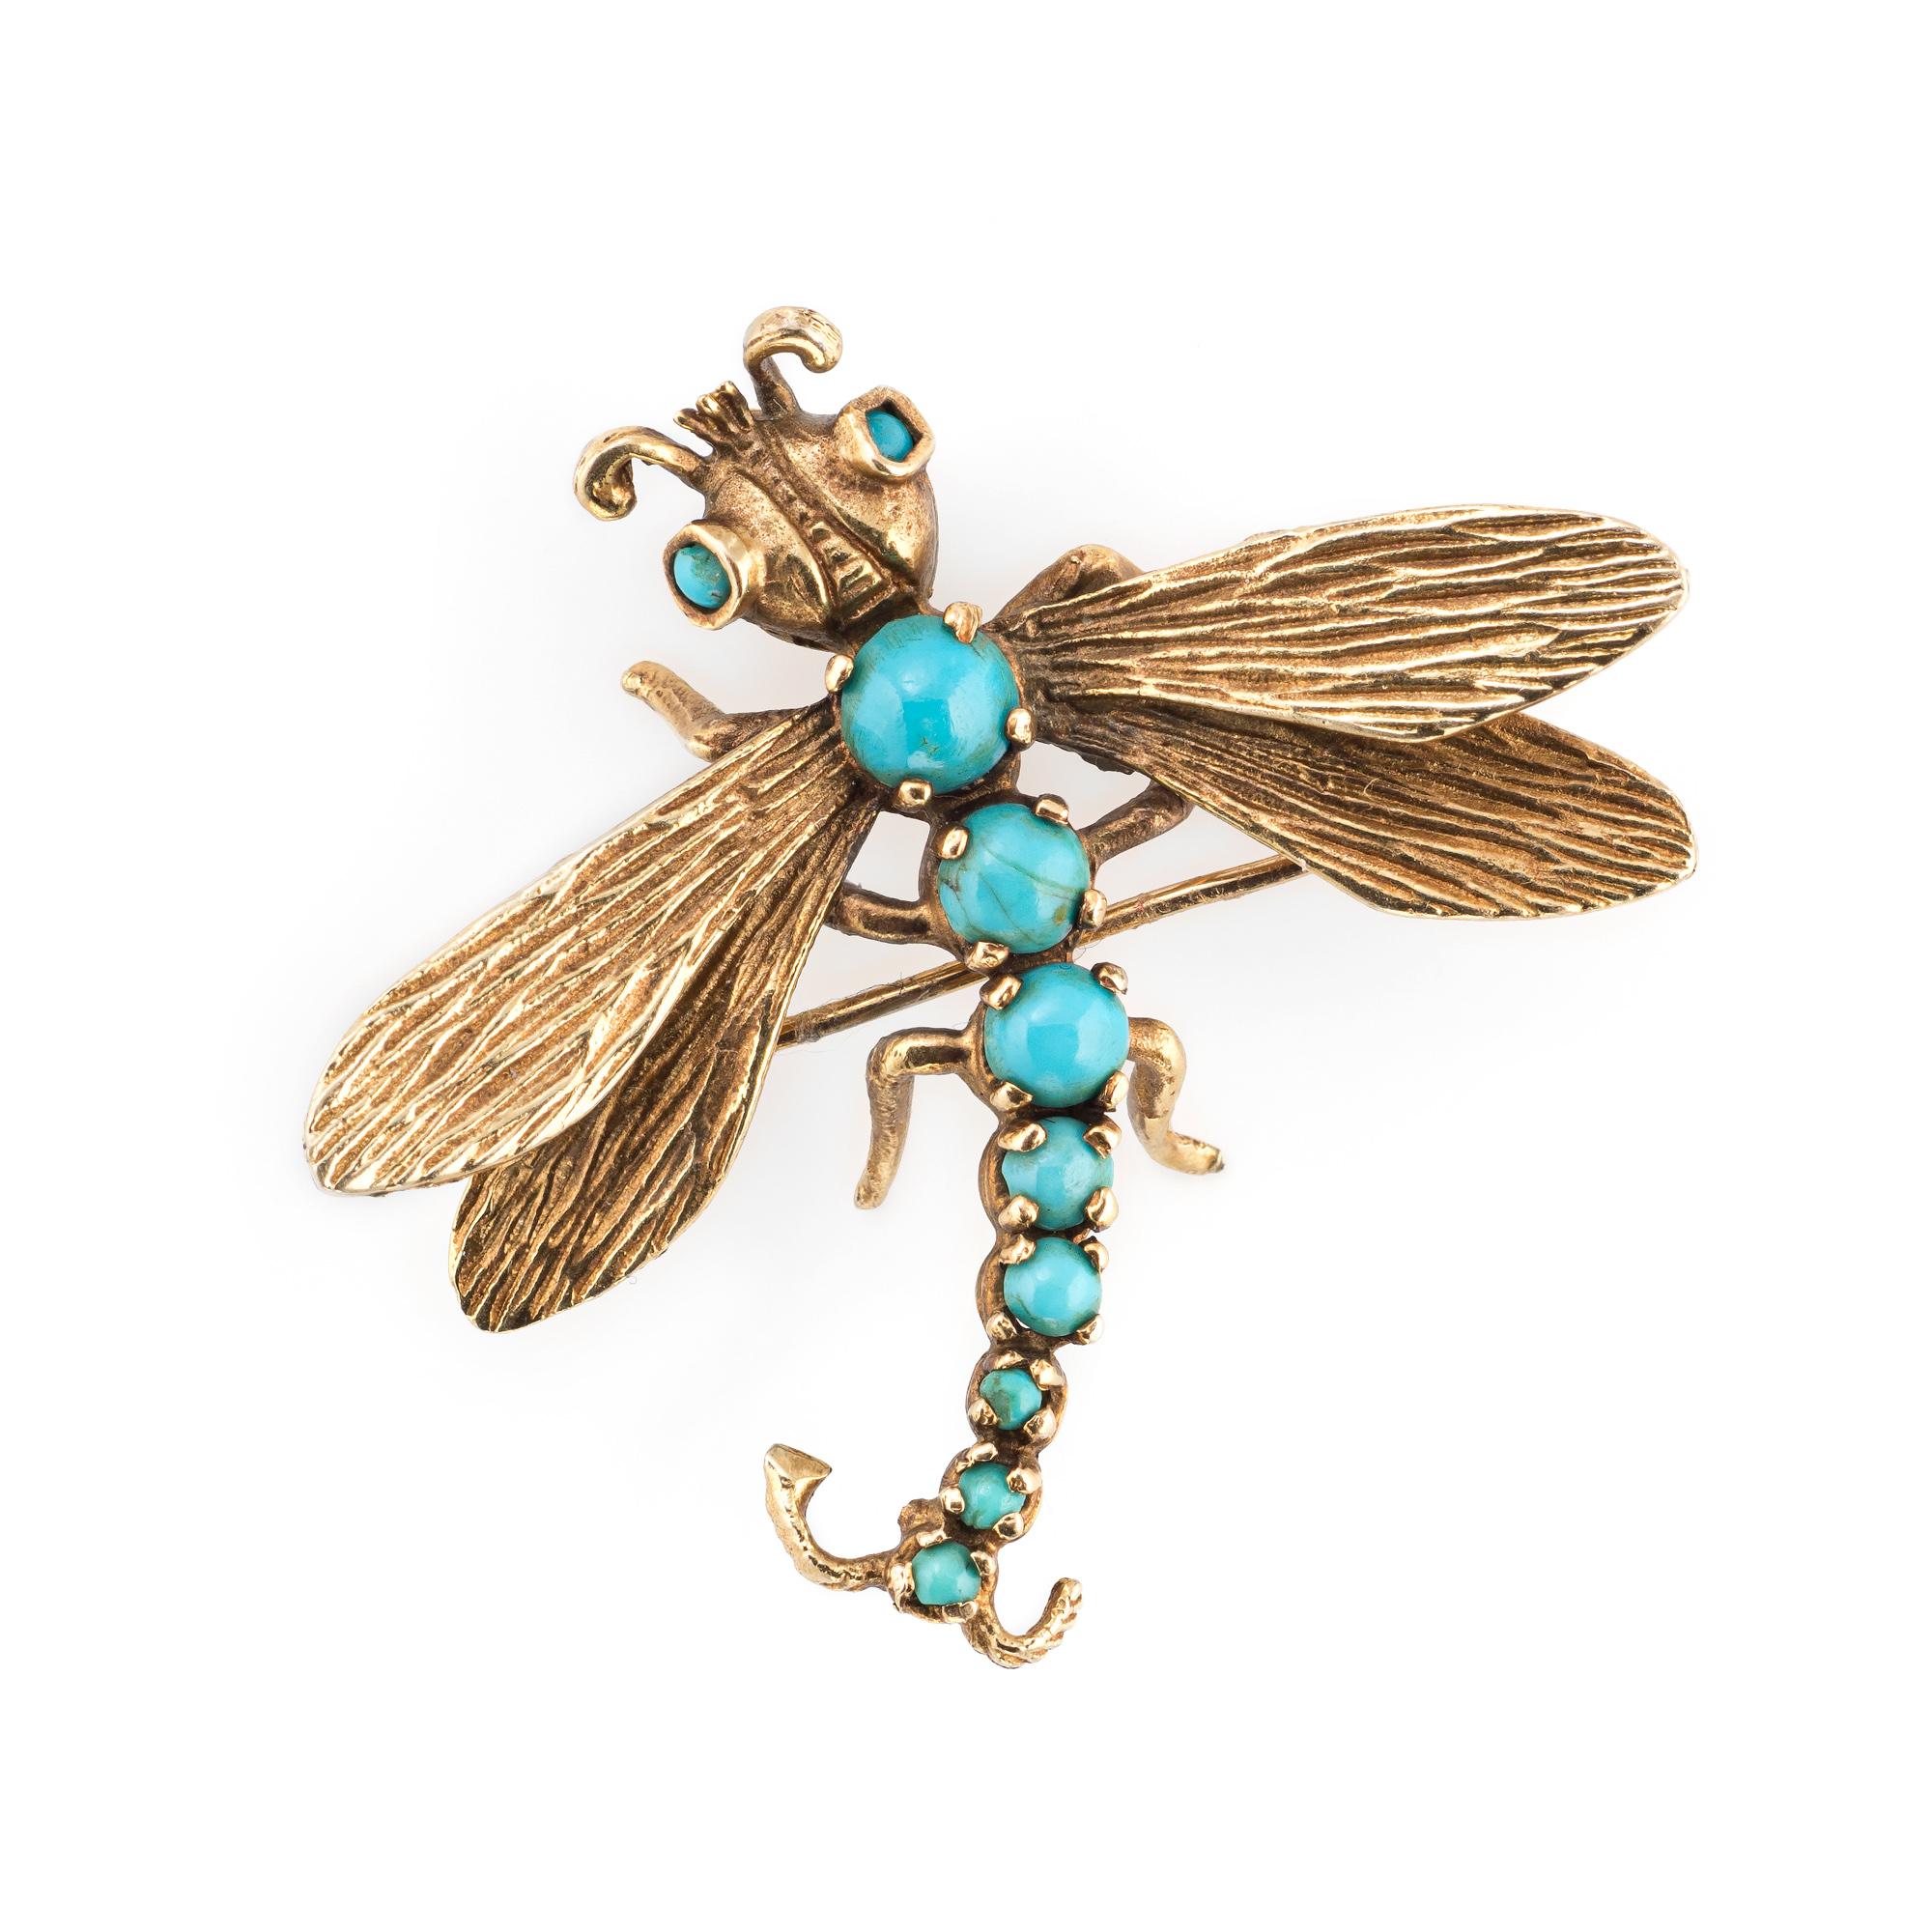 Cabochon Dragonfly Turquoise Brooch Vintage 14k Yellow Gold Estate Fine Jewelry Insect